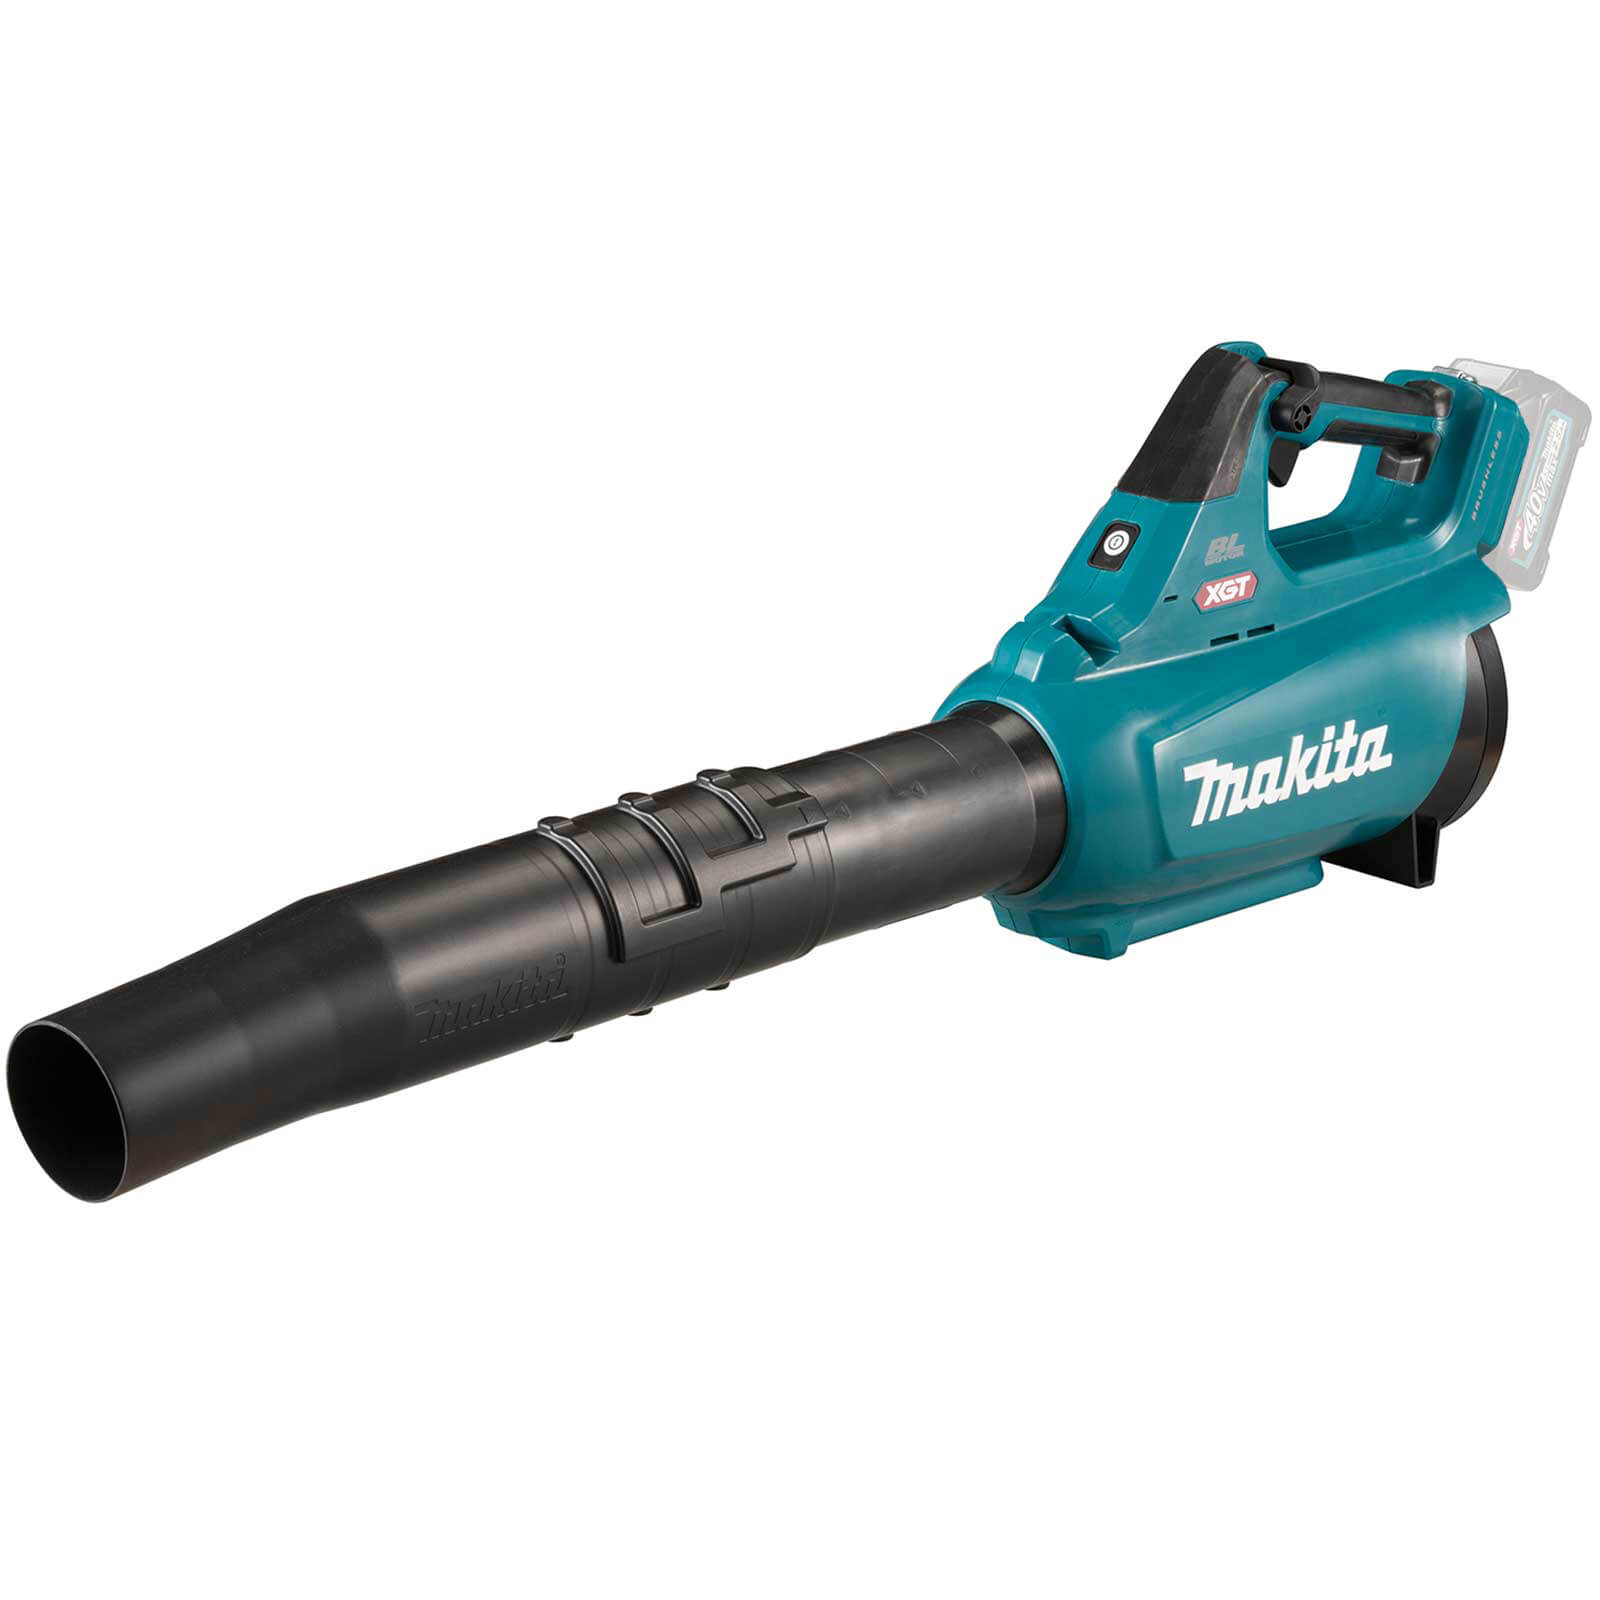 Photo of Makita Ub001g 40v Max Xgt Brushless Cordless Garden Leaf Blower No Batteries No Charger